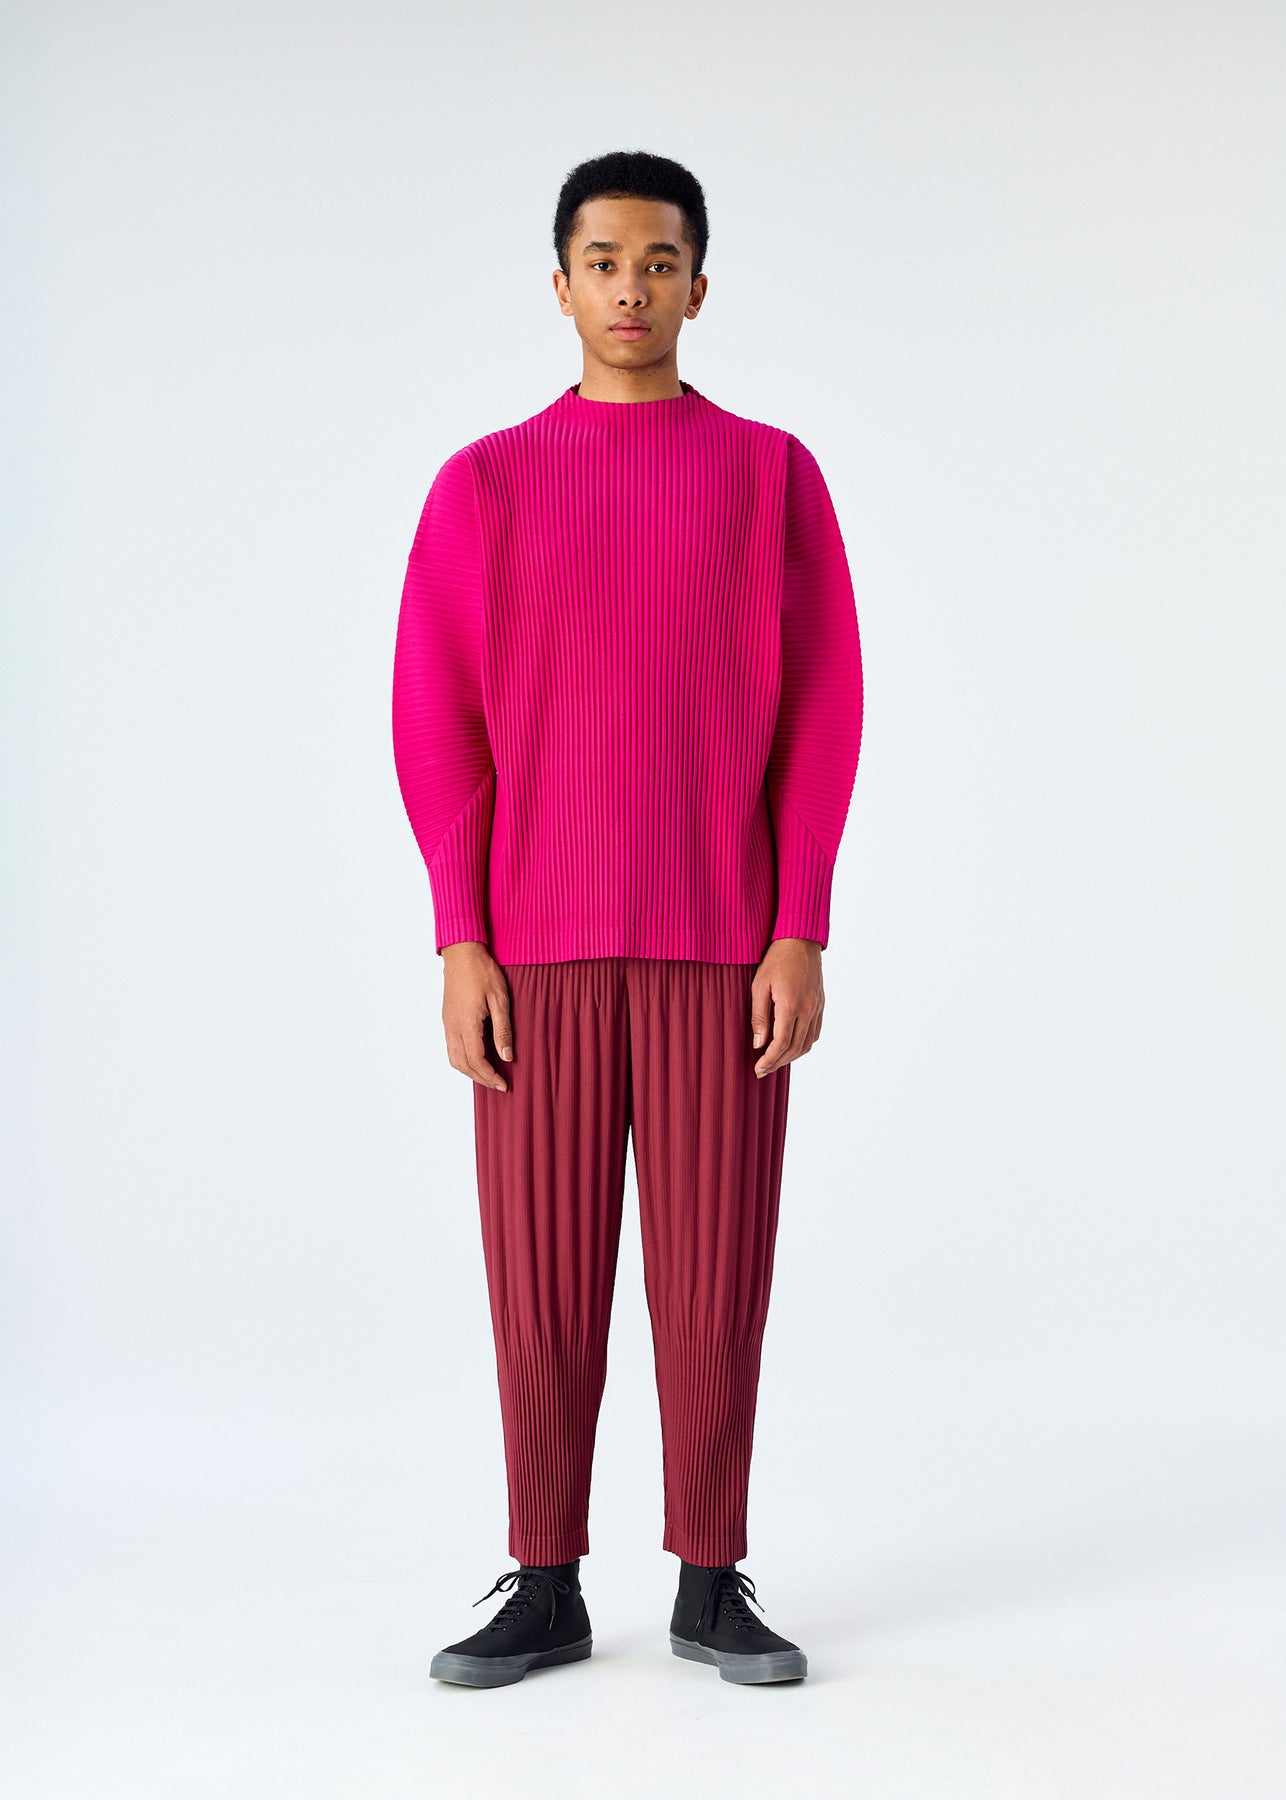 USA | ISSEY ONLINE MIYAKE The | MIYAKE official ISSEY PANTS STORE COLOR PLEATS